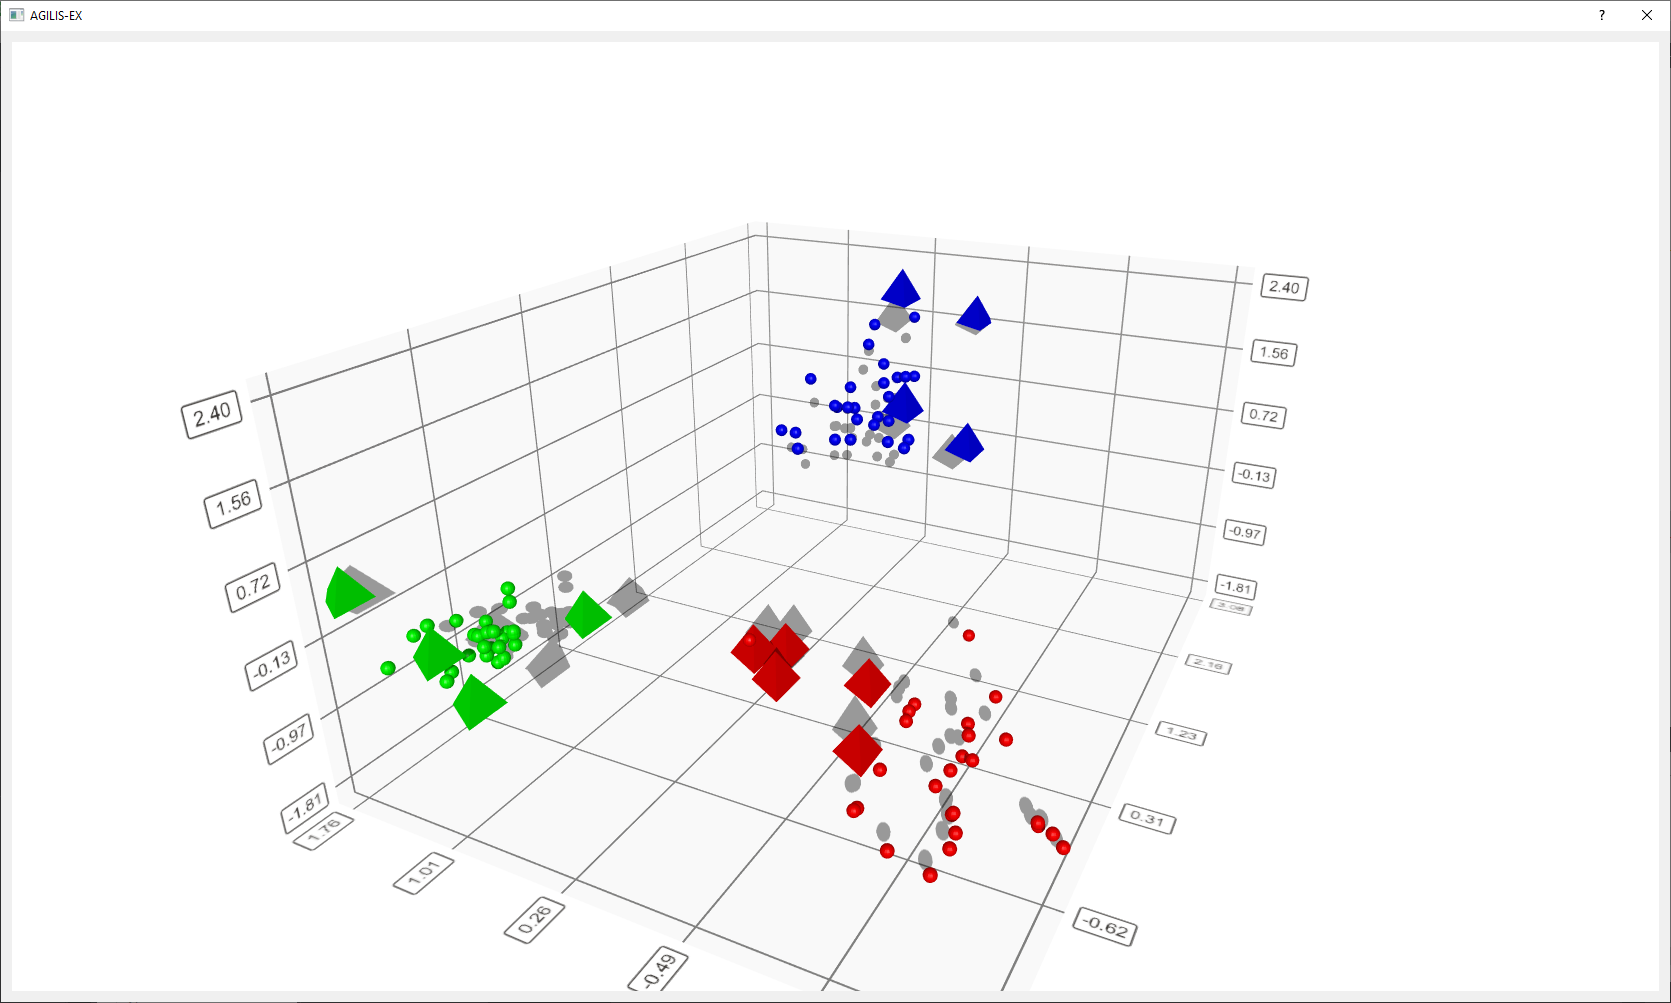 3D scatterplot showing an example of real time classification test. Spheres represent calibration data and pyramids real time classifications.